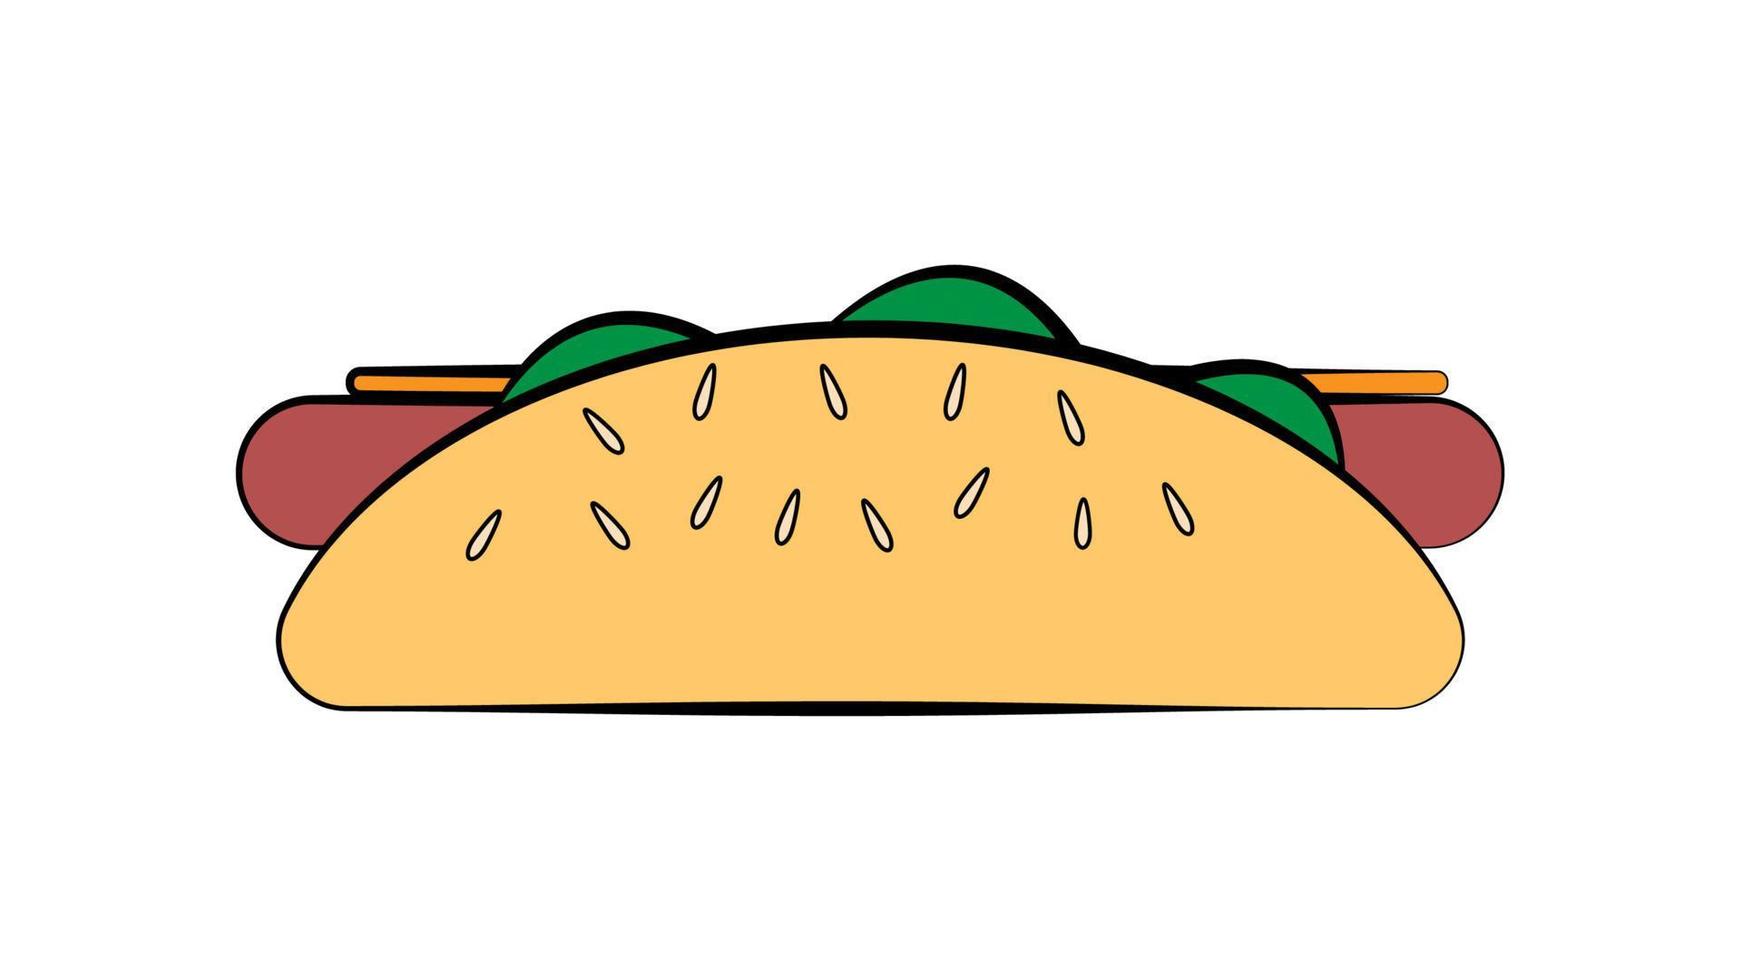 sandwich with sausage on white background, hot dog, vector illustration. sandwich, hearty snack, fast food food. bun with herbs, mustard and meat, sesame seeds on top